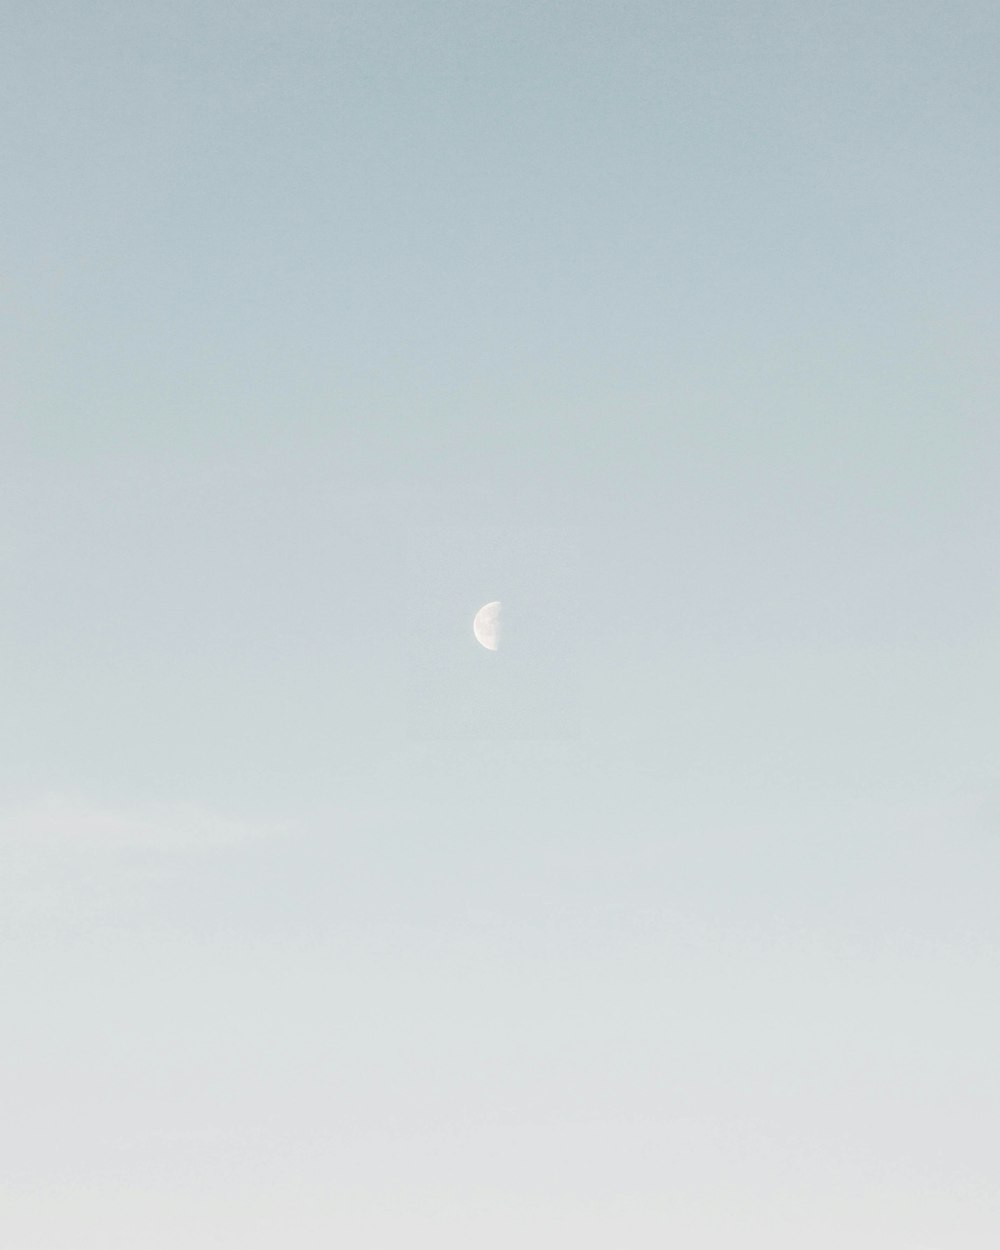 photo of half-moon during daytime